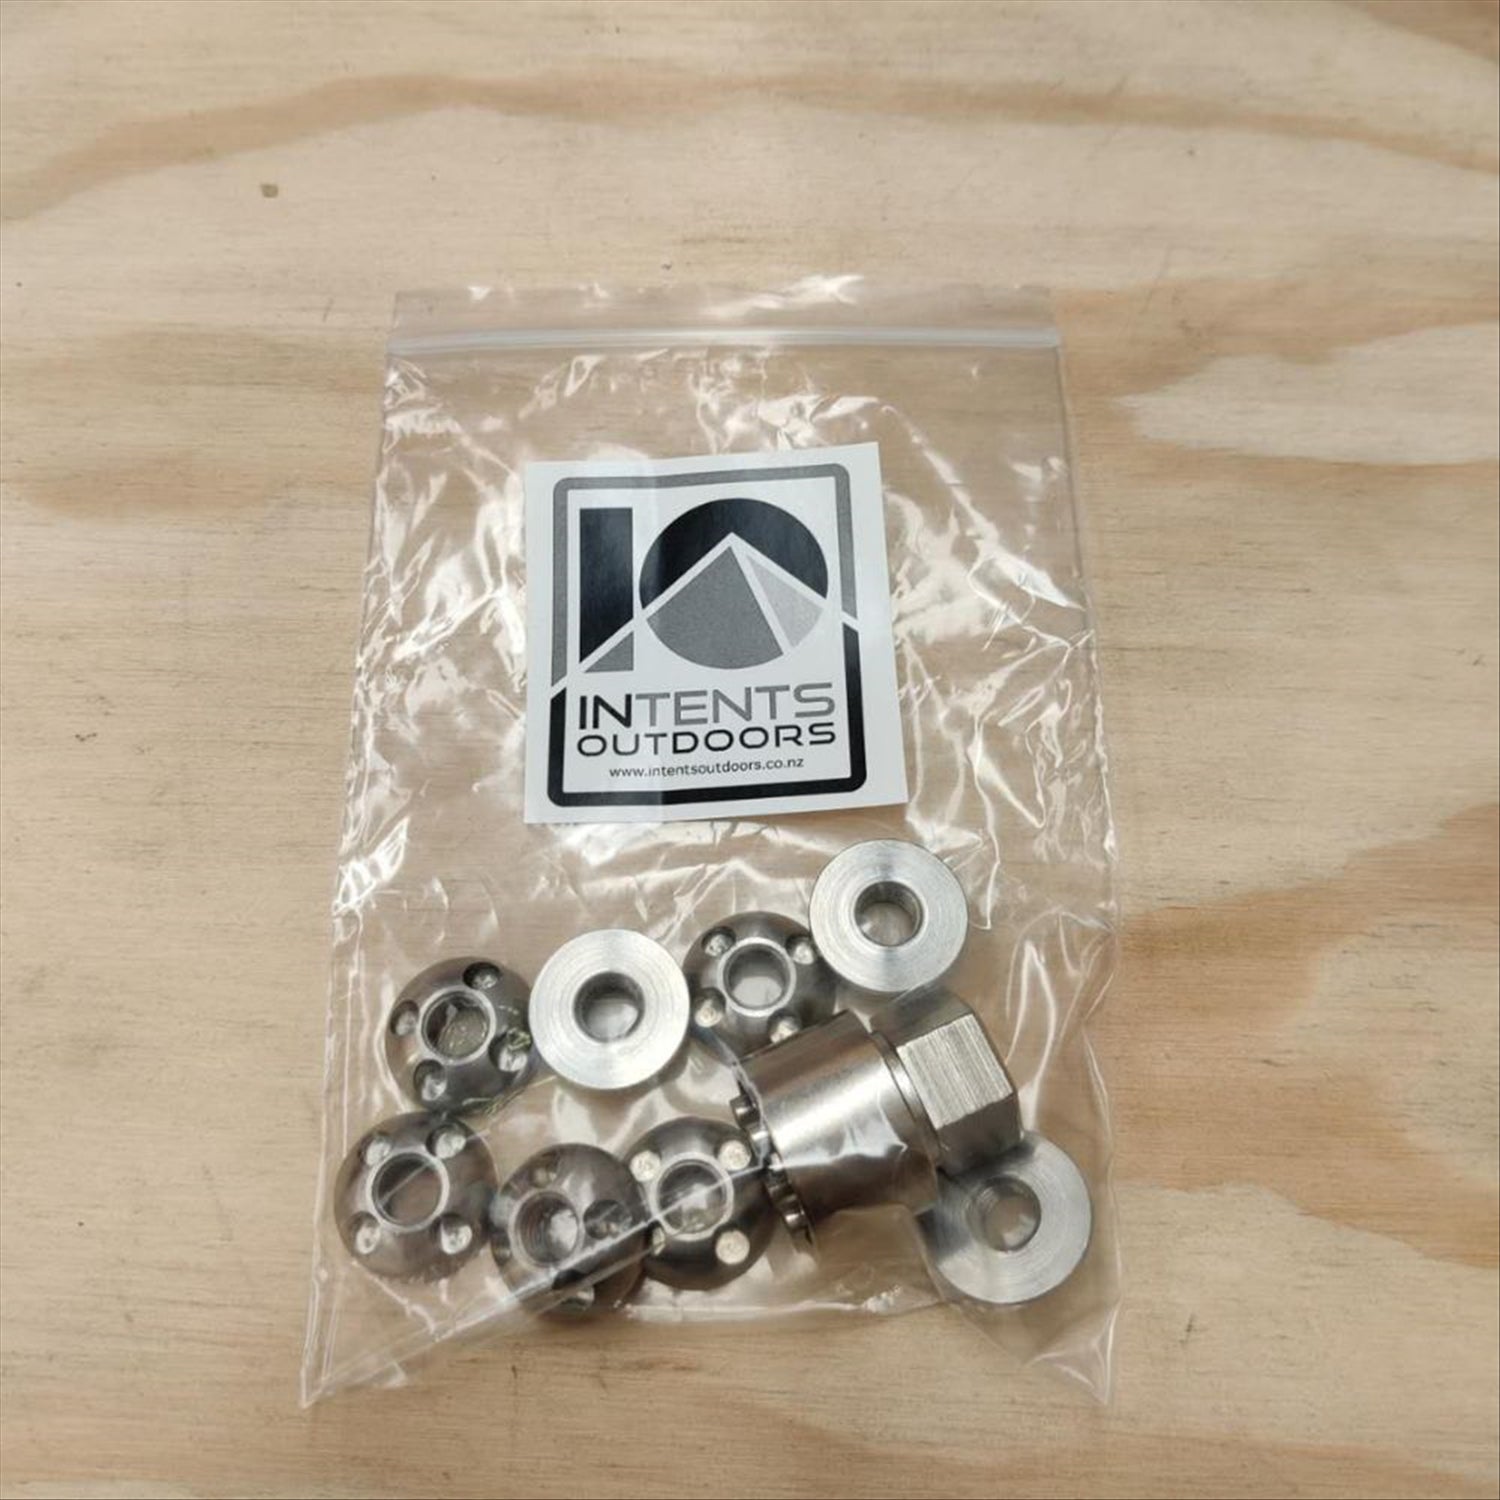 Roof Top Tent Security Nuts - 8 nuts and key